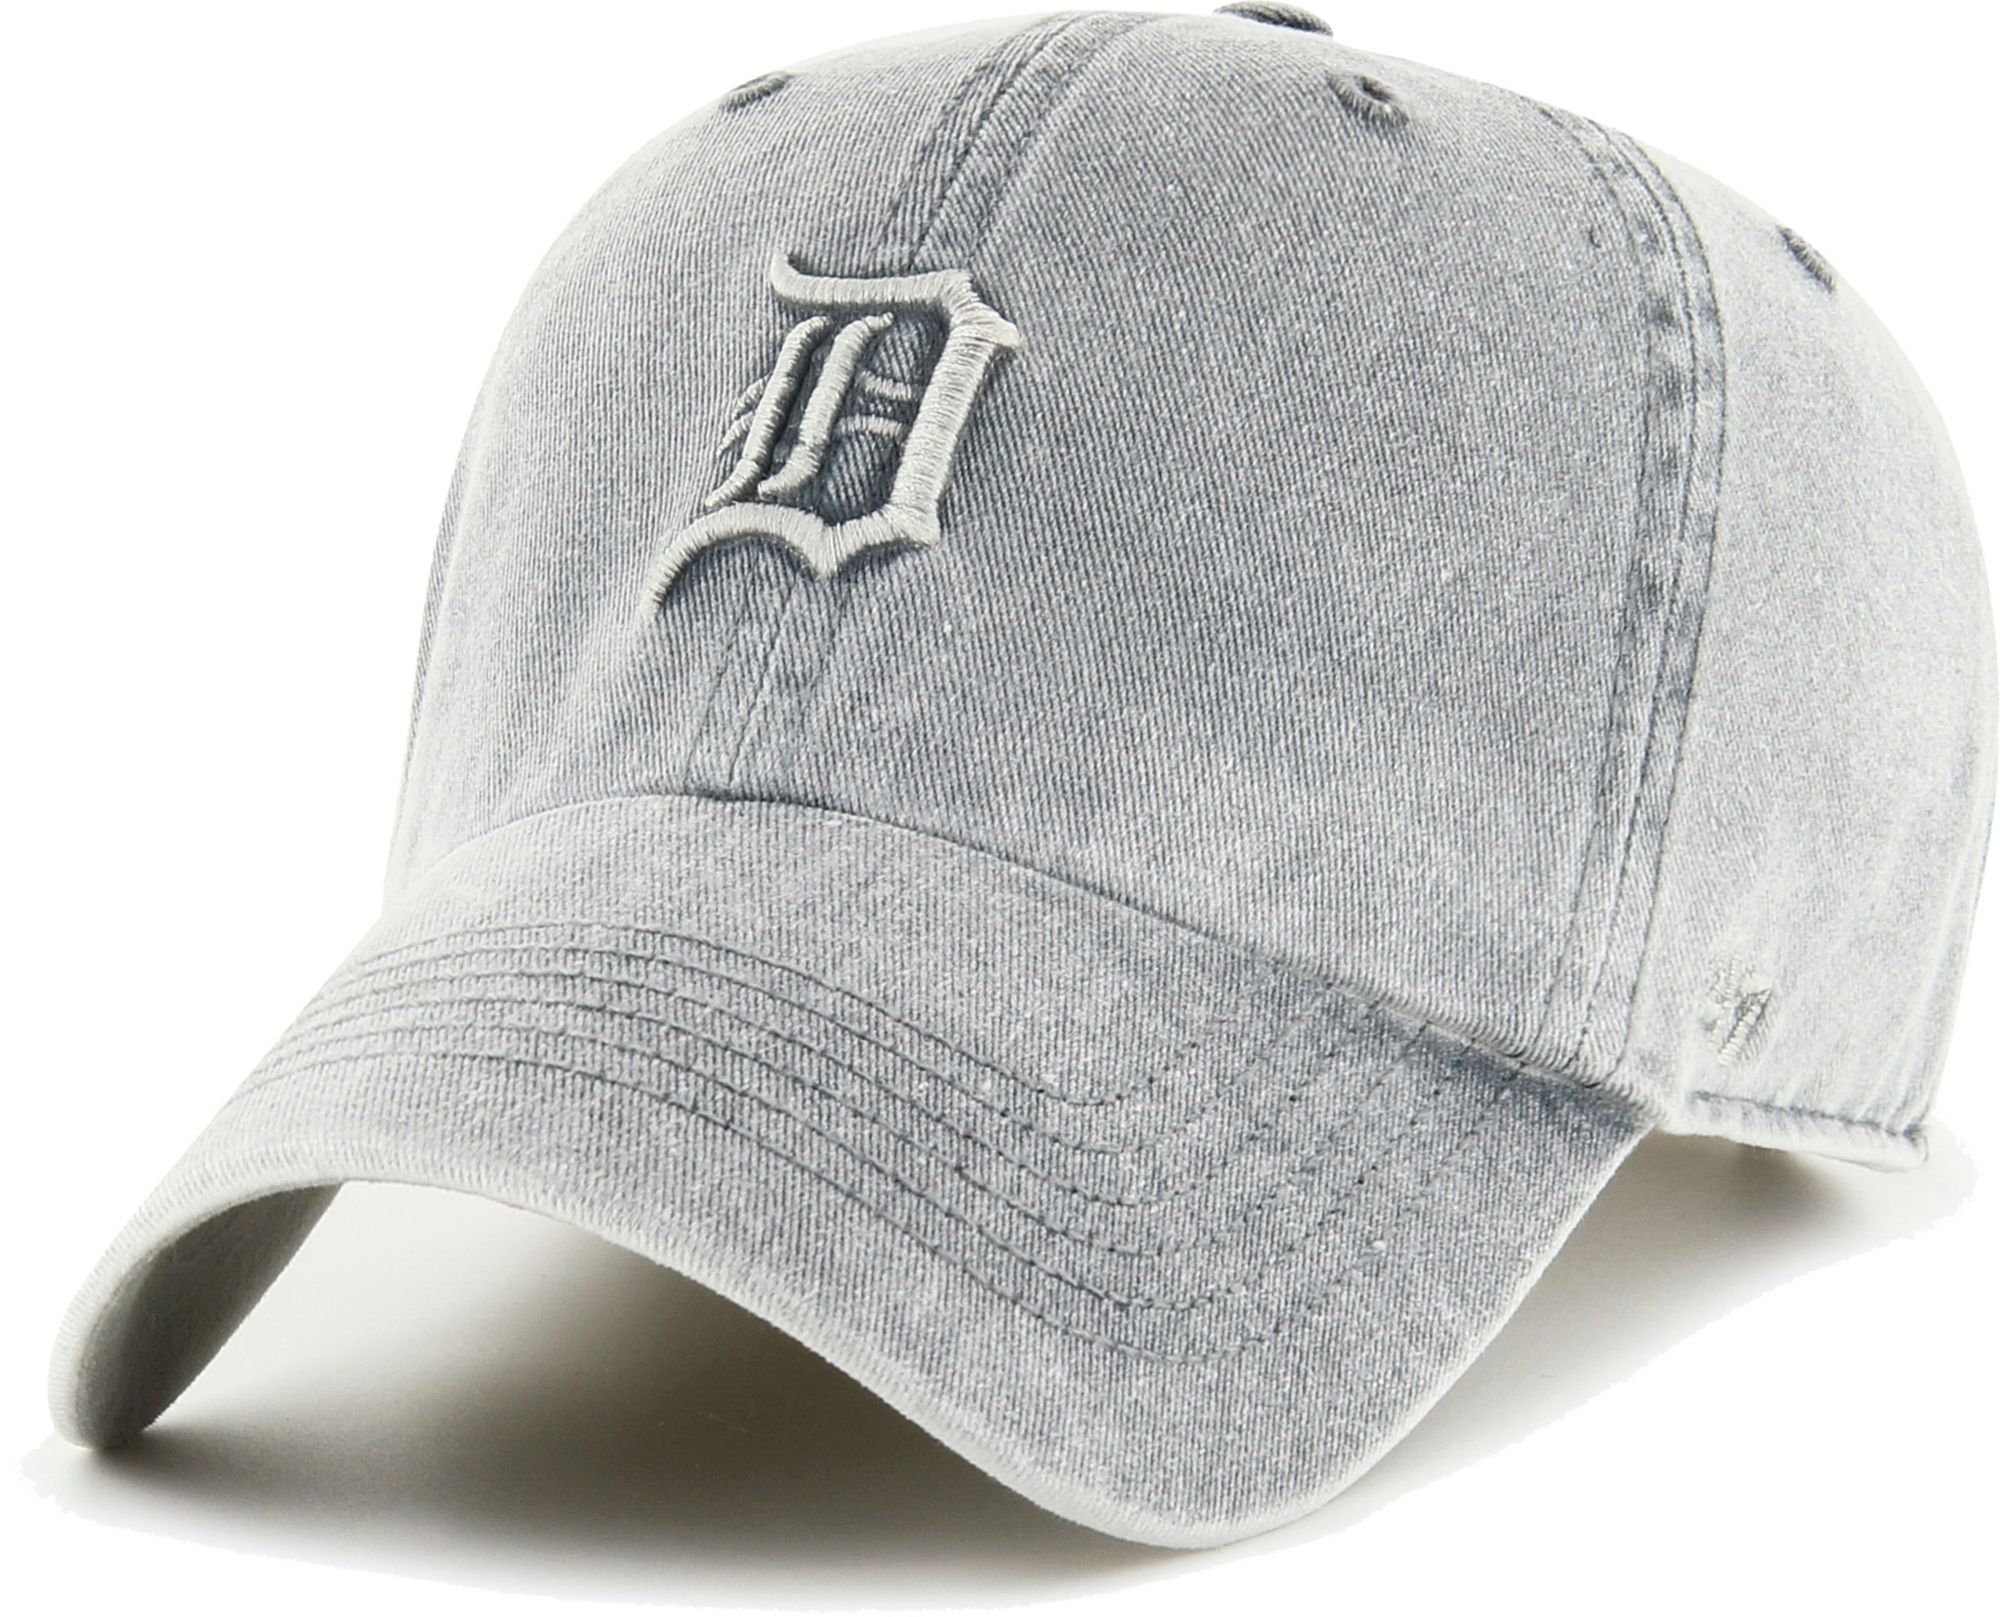 Detroit Tigers Women's 47 Brand Stars Red White Blue Clean Up